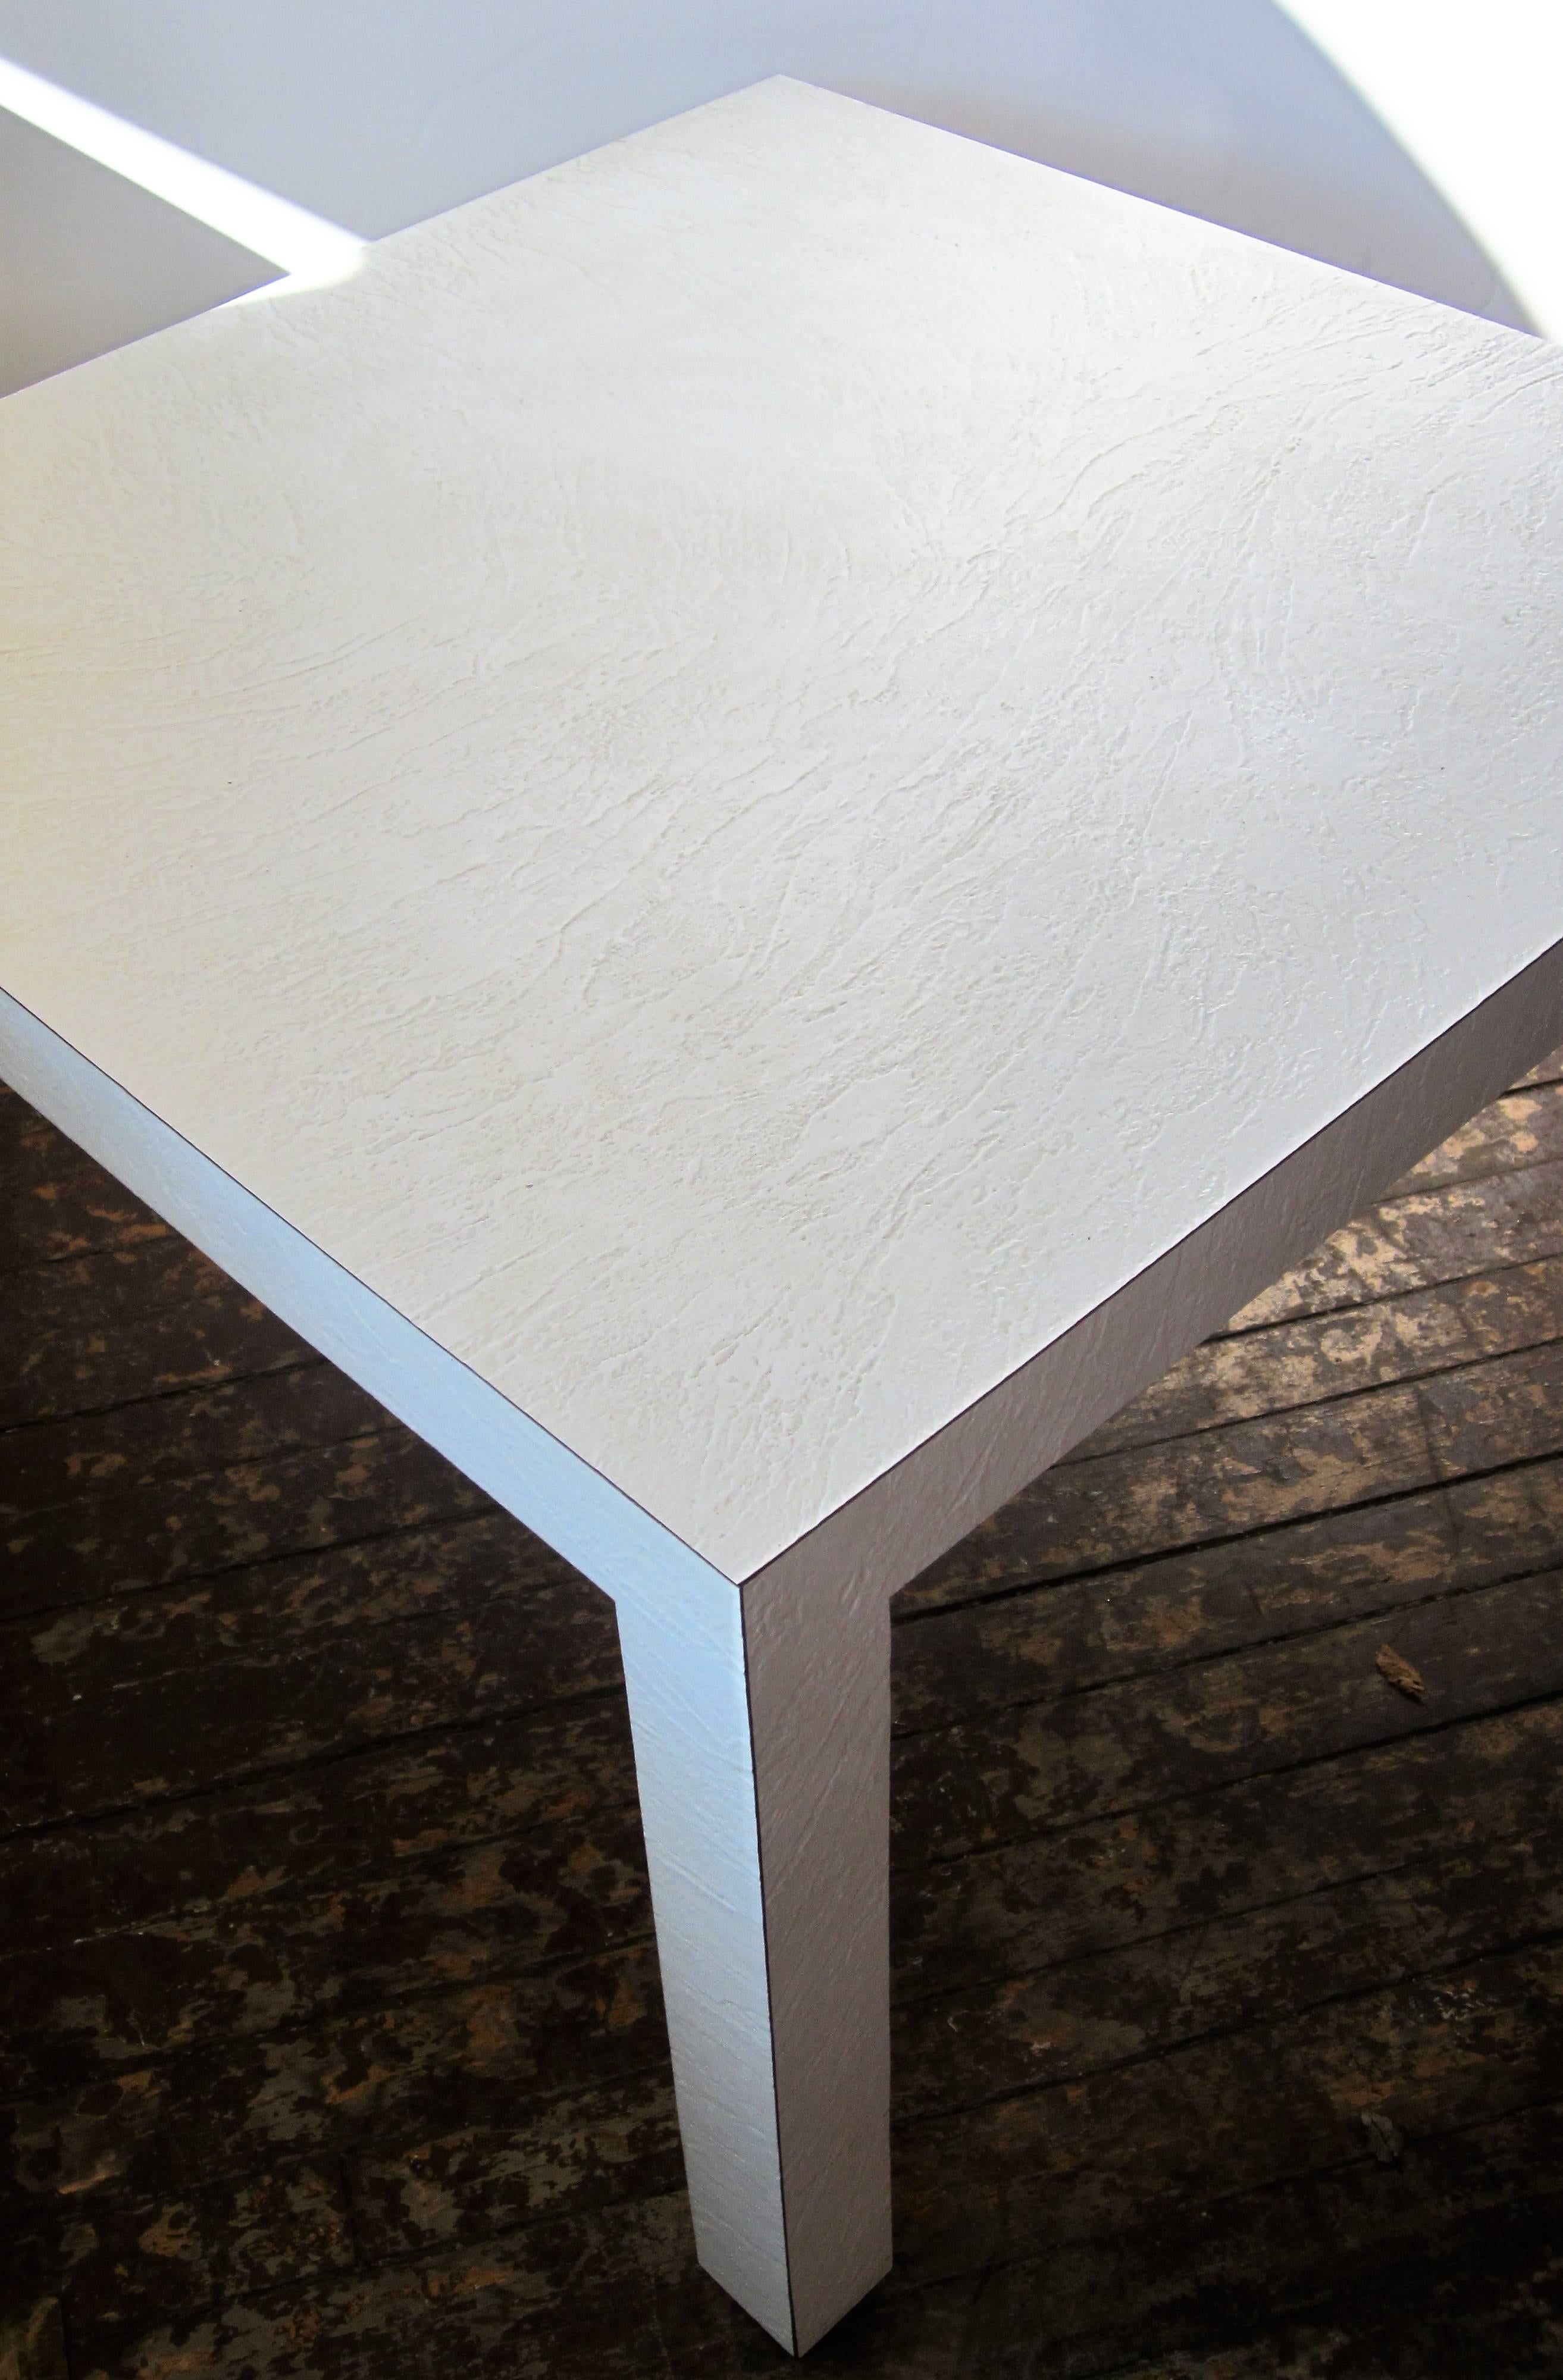 Custom-made textured white laminate parsons table, circa 1970s measuring 32 inches square x 21 inches high.